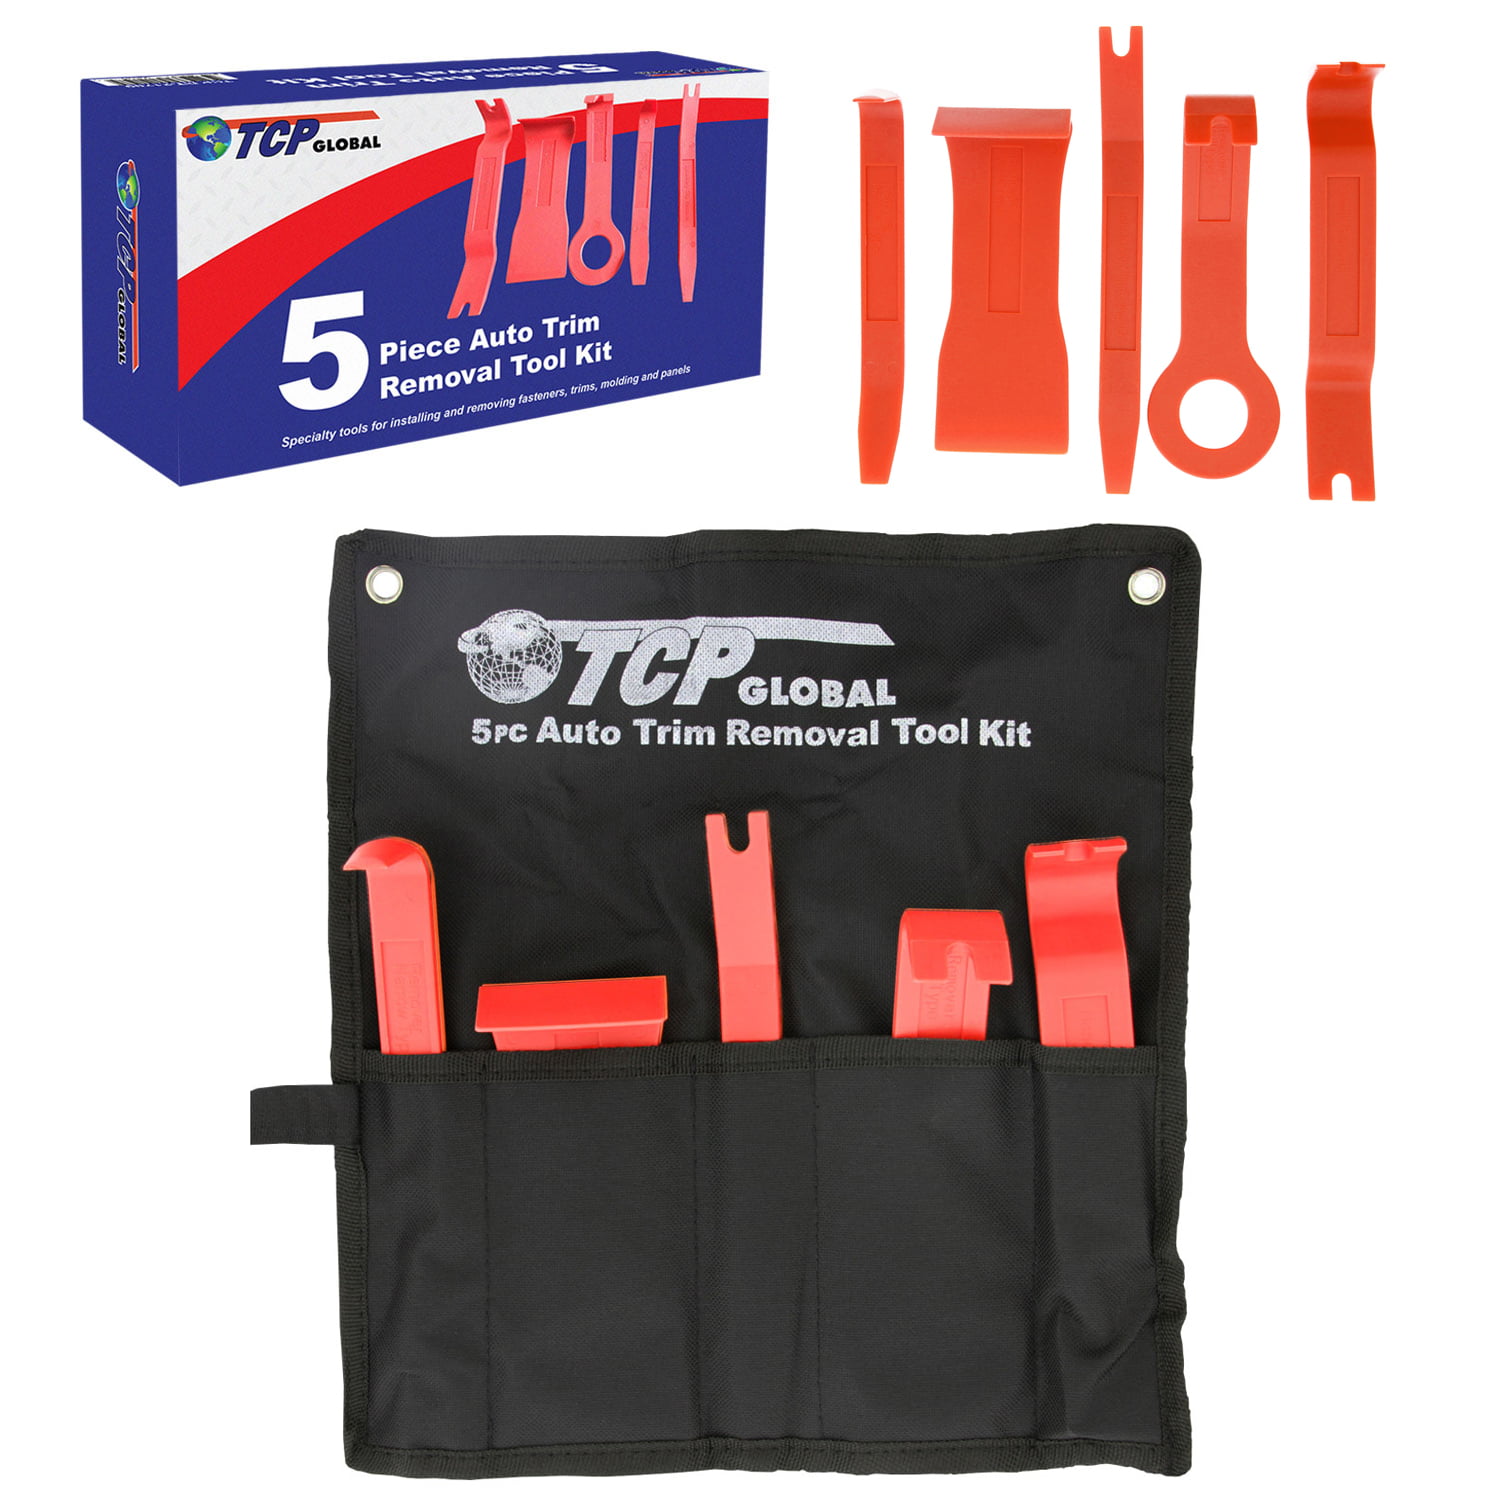 Molding and Panels Specialty Tools for Installing and Removing Fasteners Trims MIKKUPPA 6 Piece Auto Trim Removal Tool Kit 